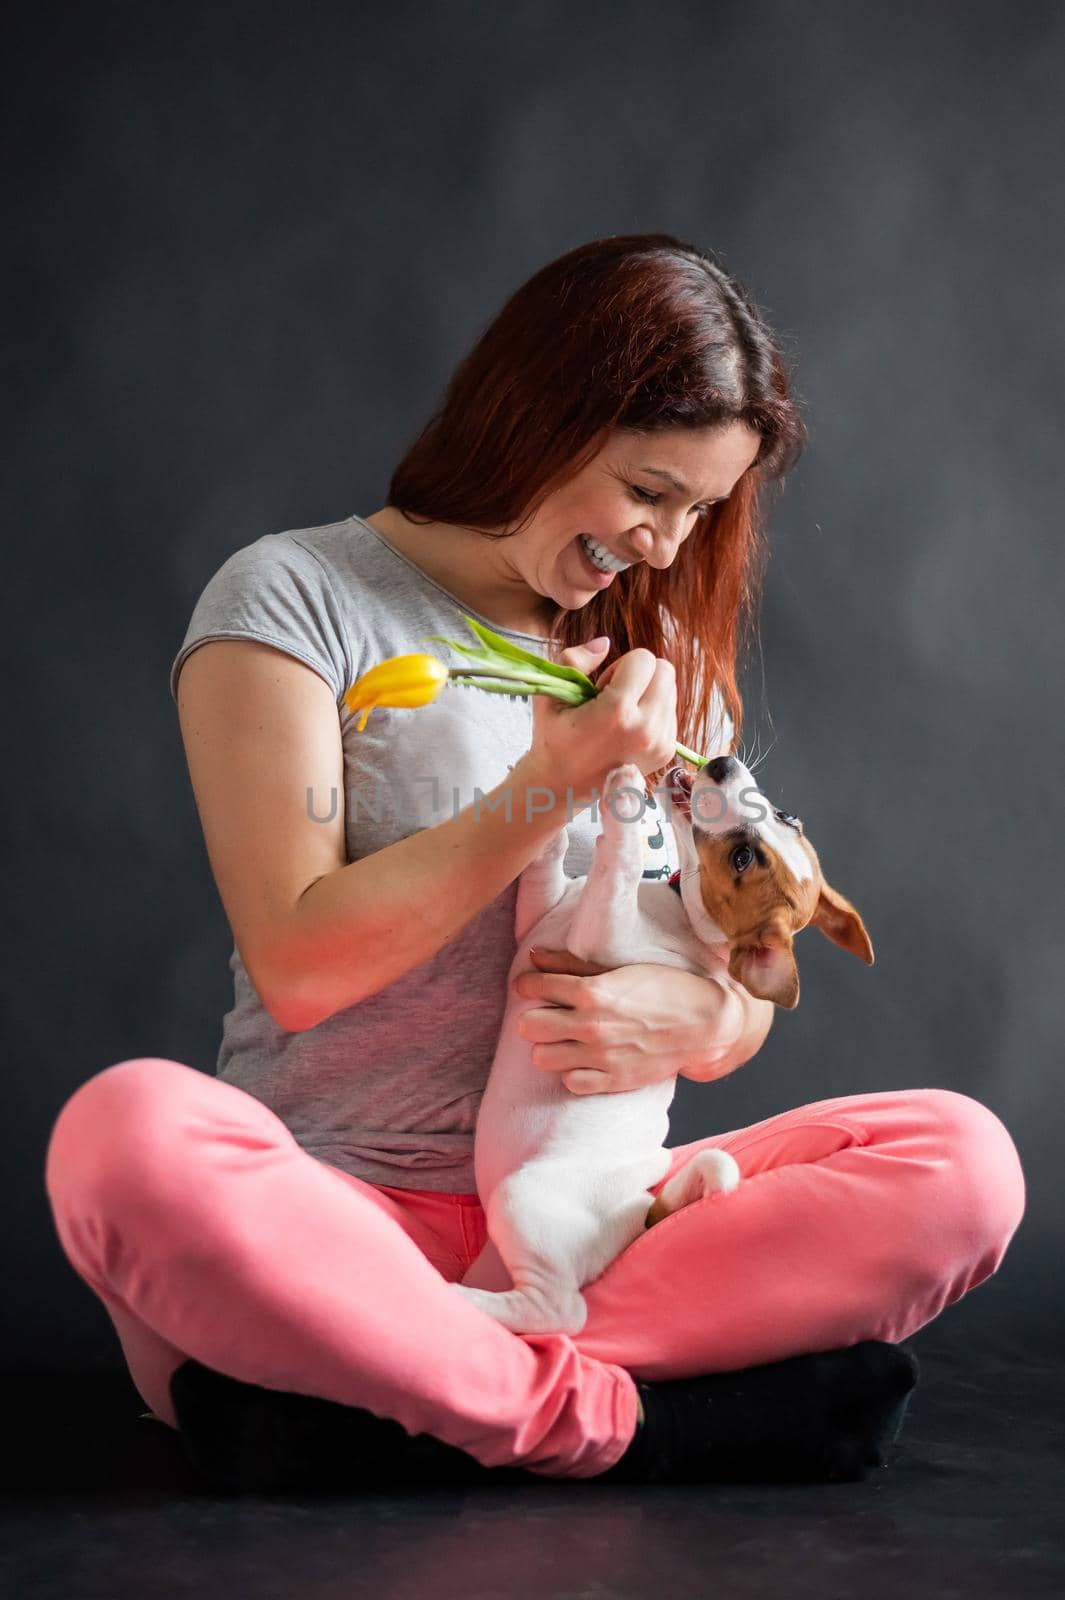 Red-haired woman holding a yellow tulip and playing with her puppy on a black background by mrwed54